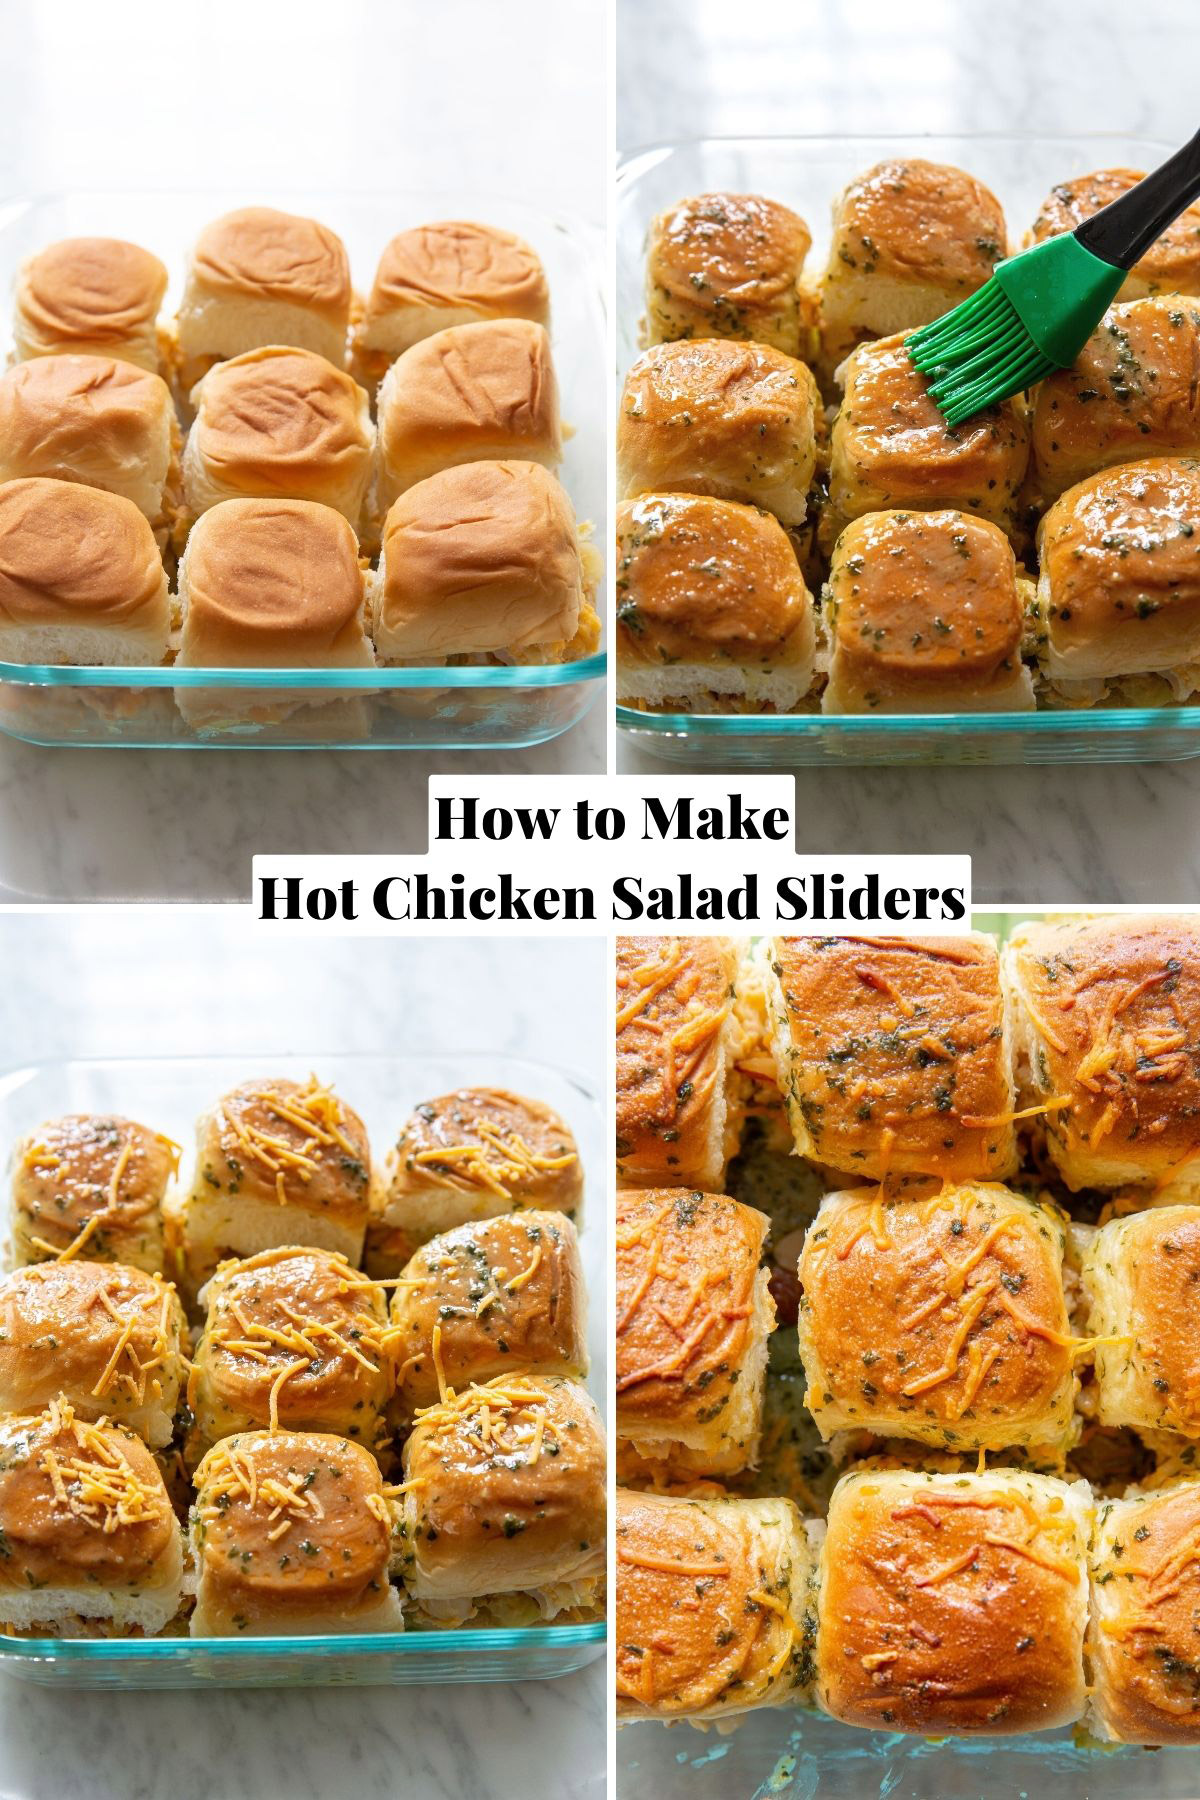 How to Make Hot Chicken Salad Sliders